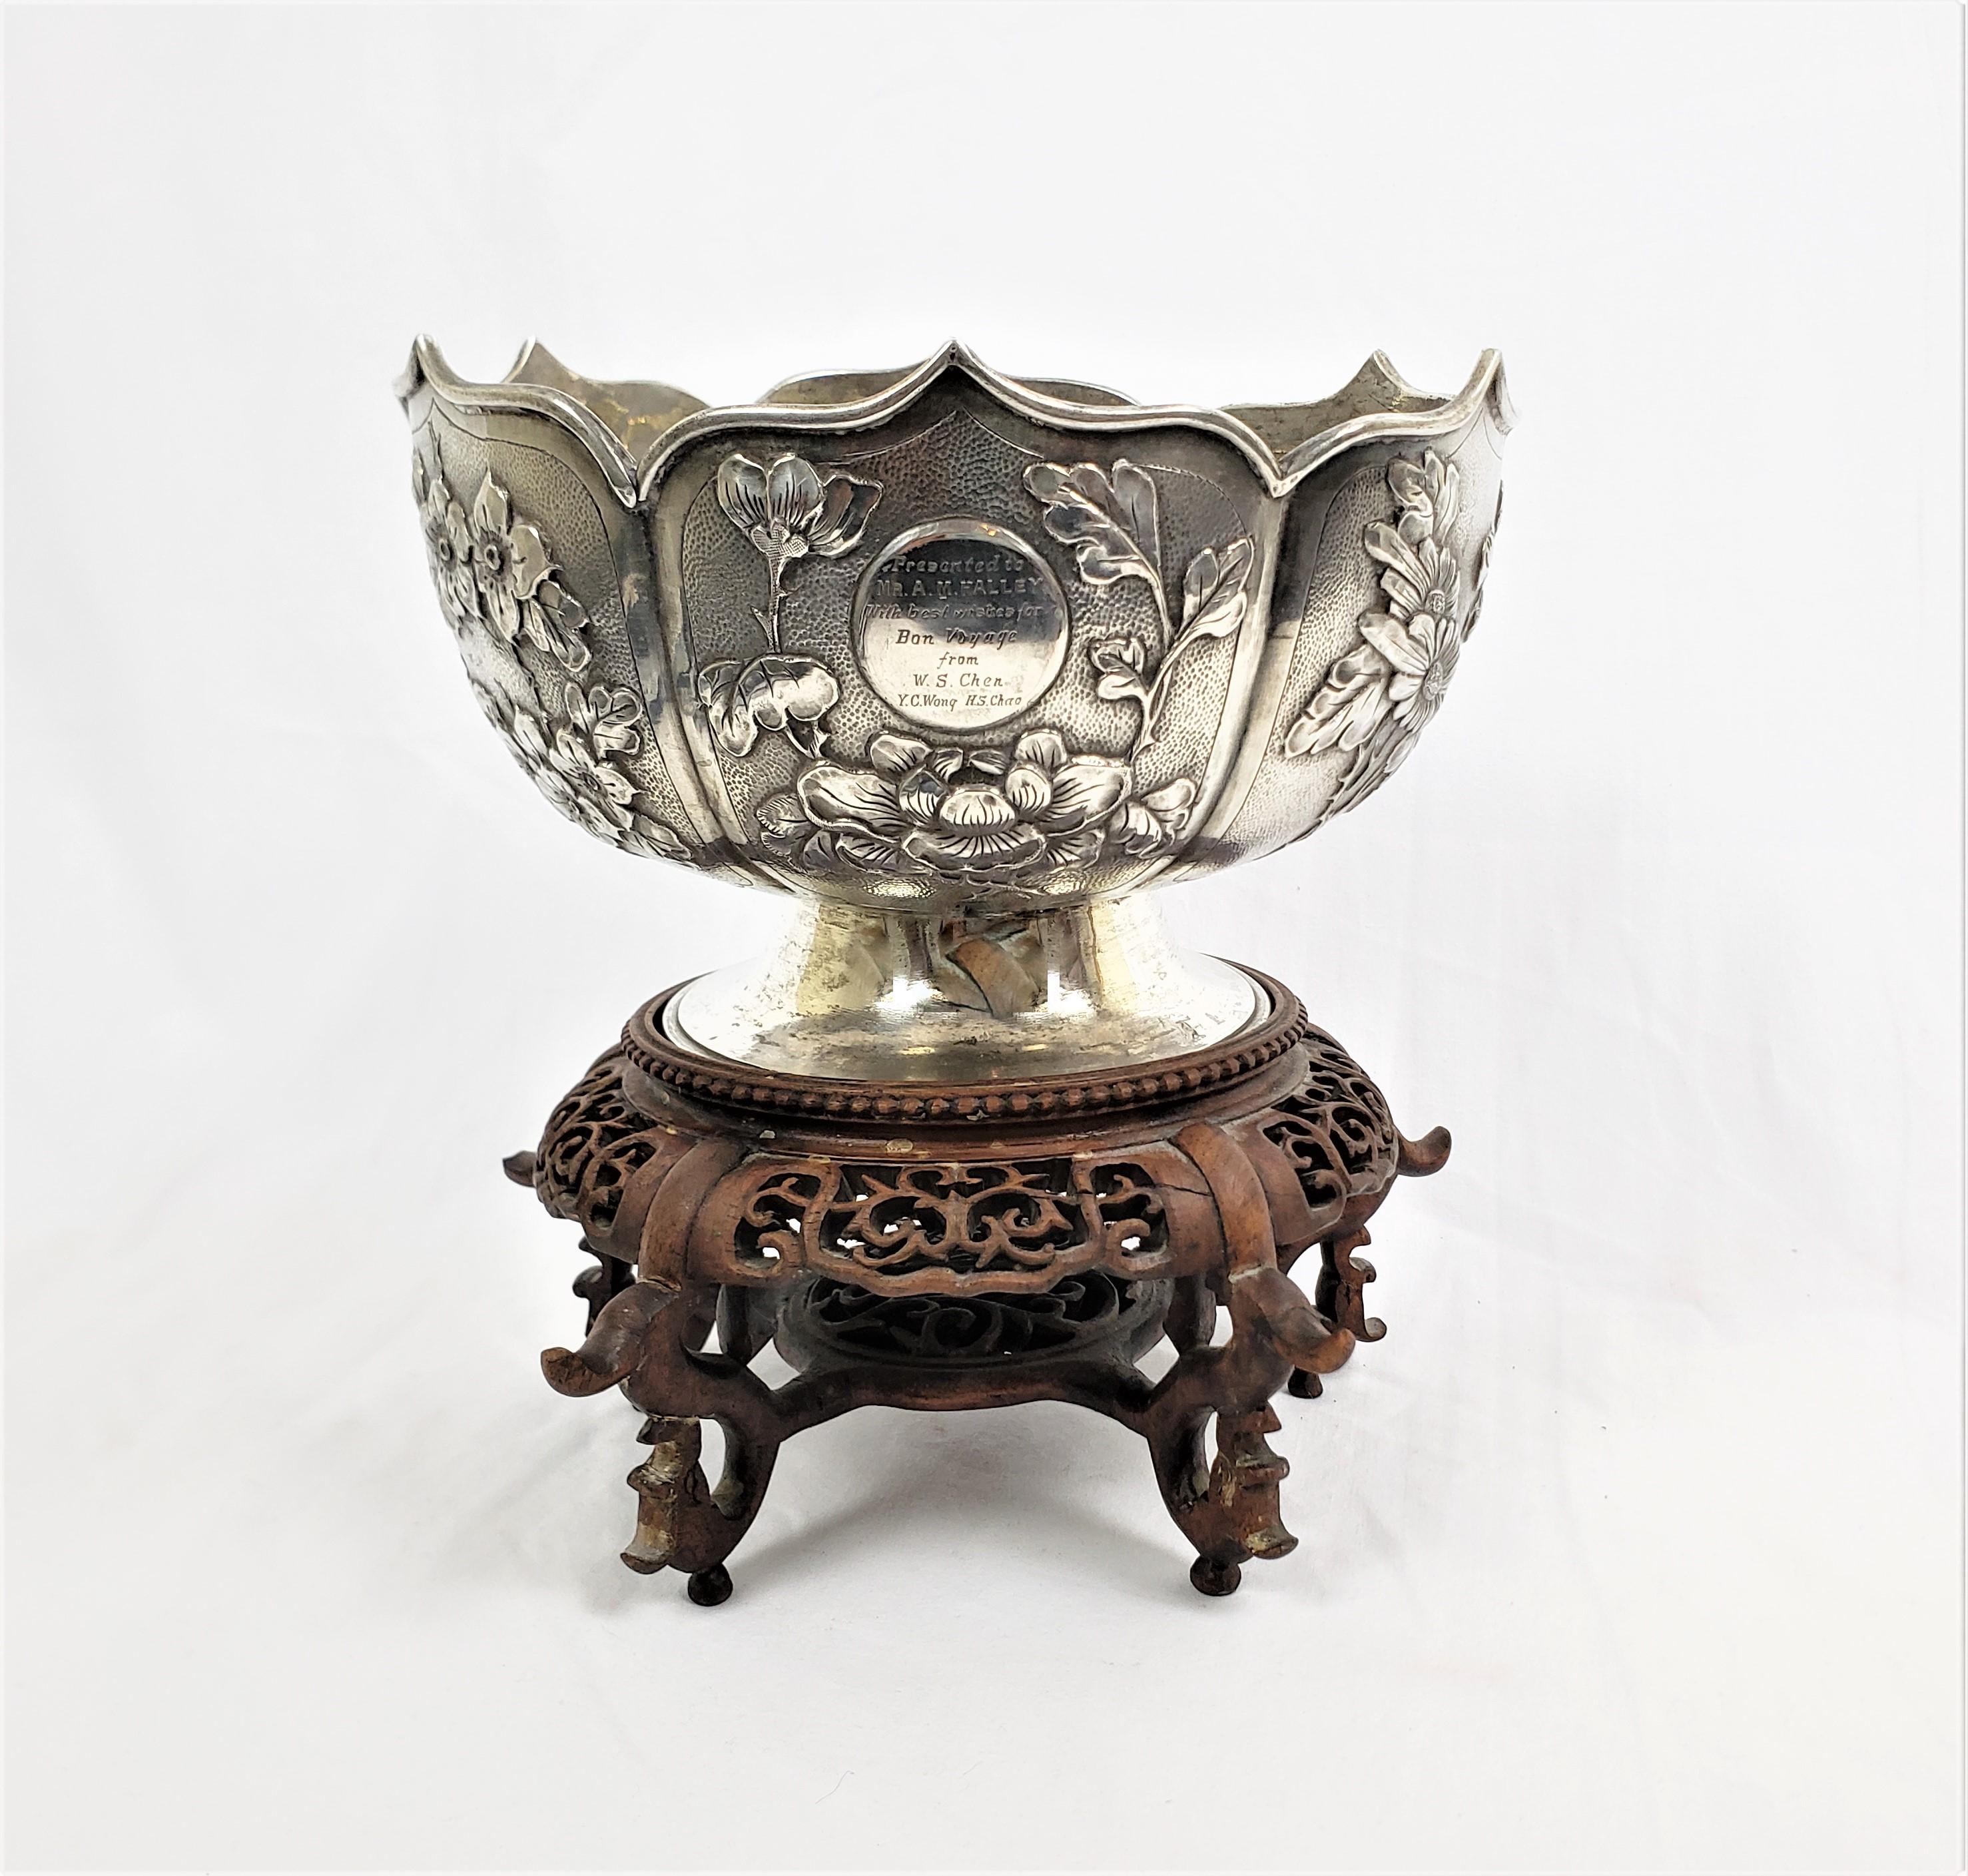 This silver bowl was made by Zee Sung of China in approximately 1910 in the period Chinese Export style. The bowl is composed of silver with six stylized petal shaped panels done with ornate chased decoration depicting birds, flowers and bamboo. The